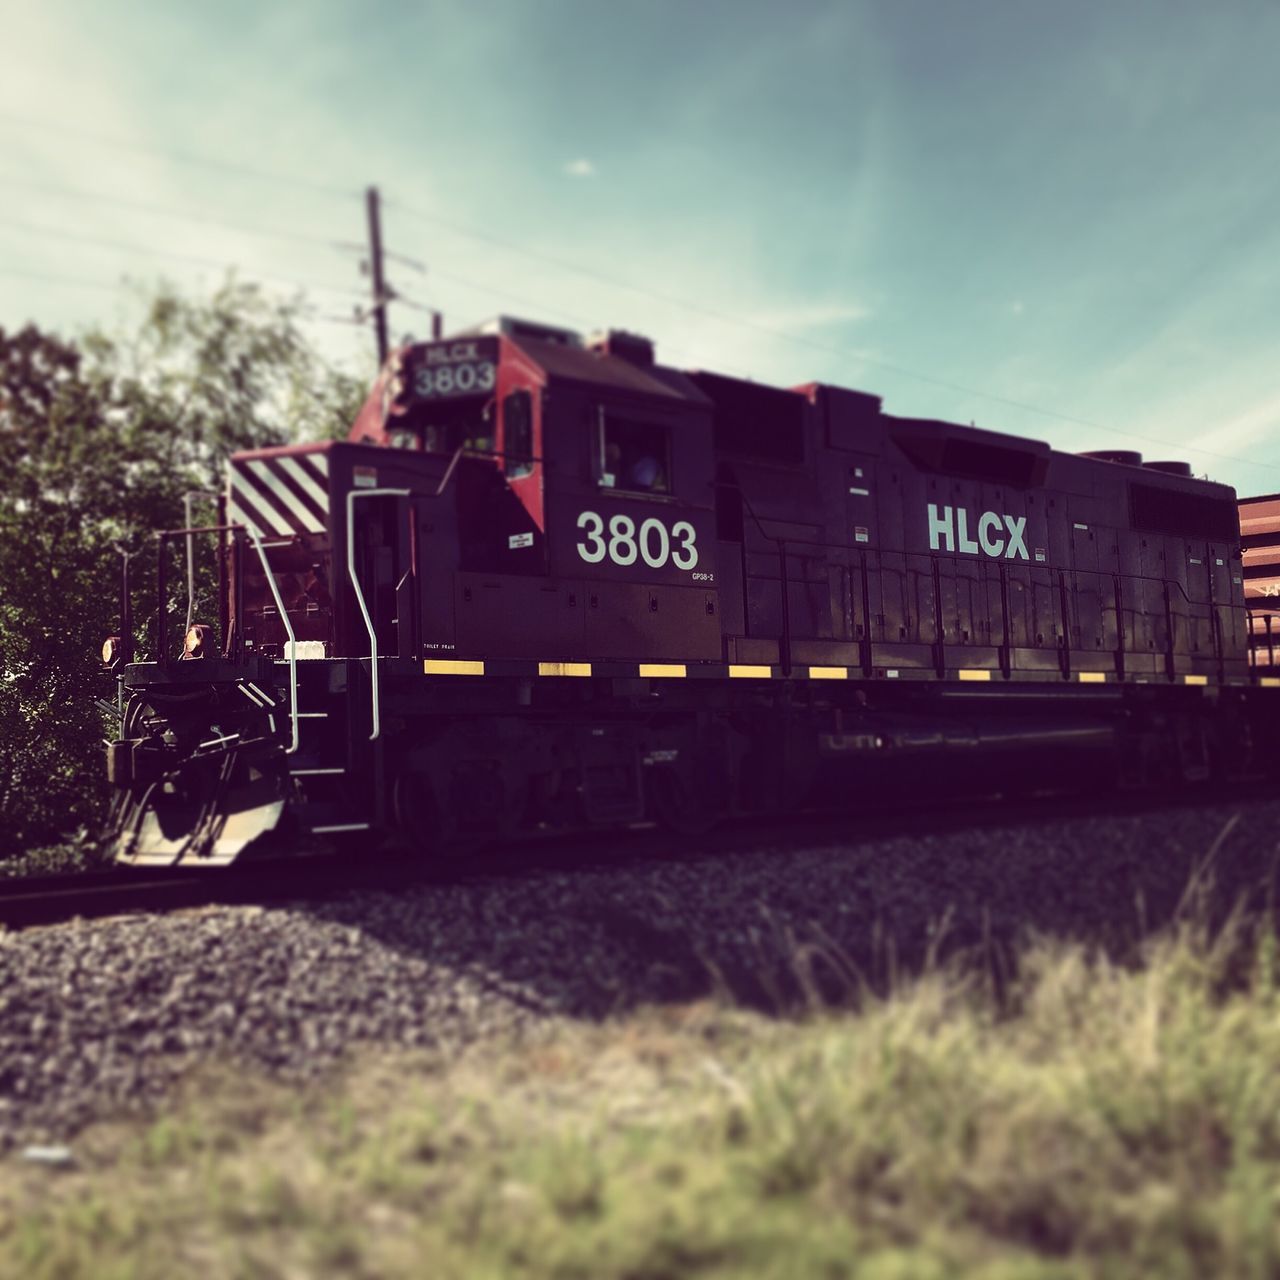 transportation, text, sky, western script, mode of transport, public transportation, rail transportation, railroad track, communication, train - vehicle, land vehicle, car, travel, information sign, cloud - sky, day, road, outdoors, on the move, tree